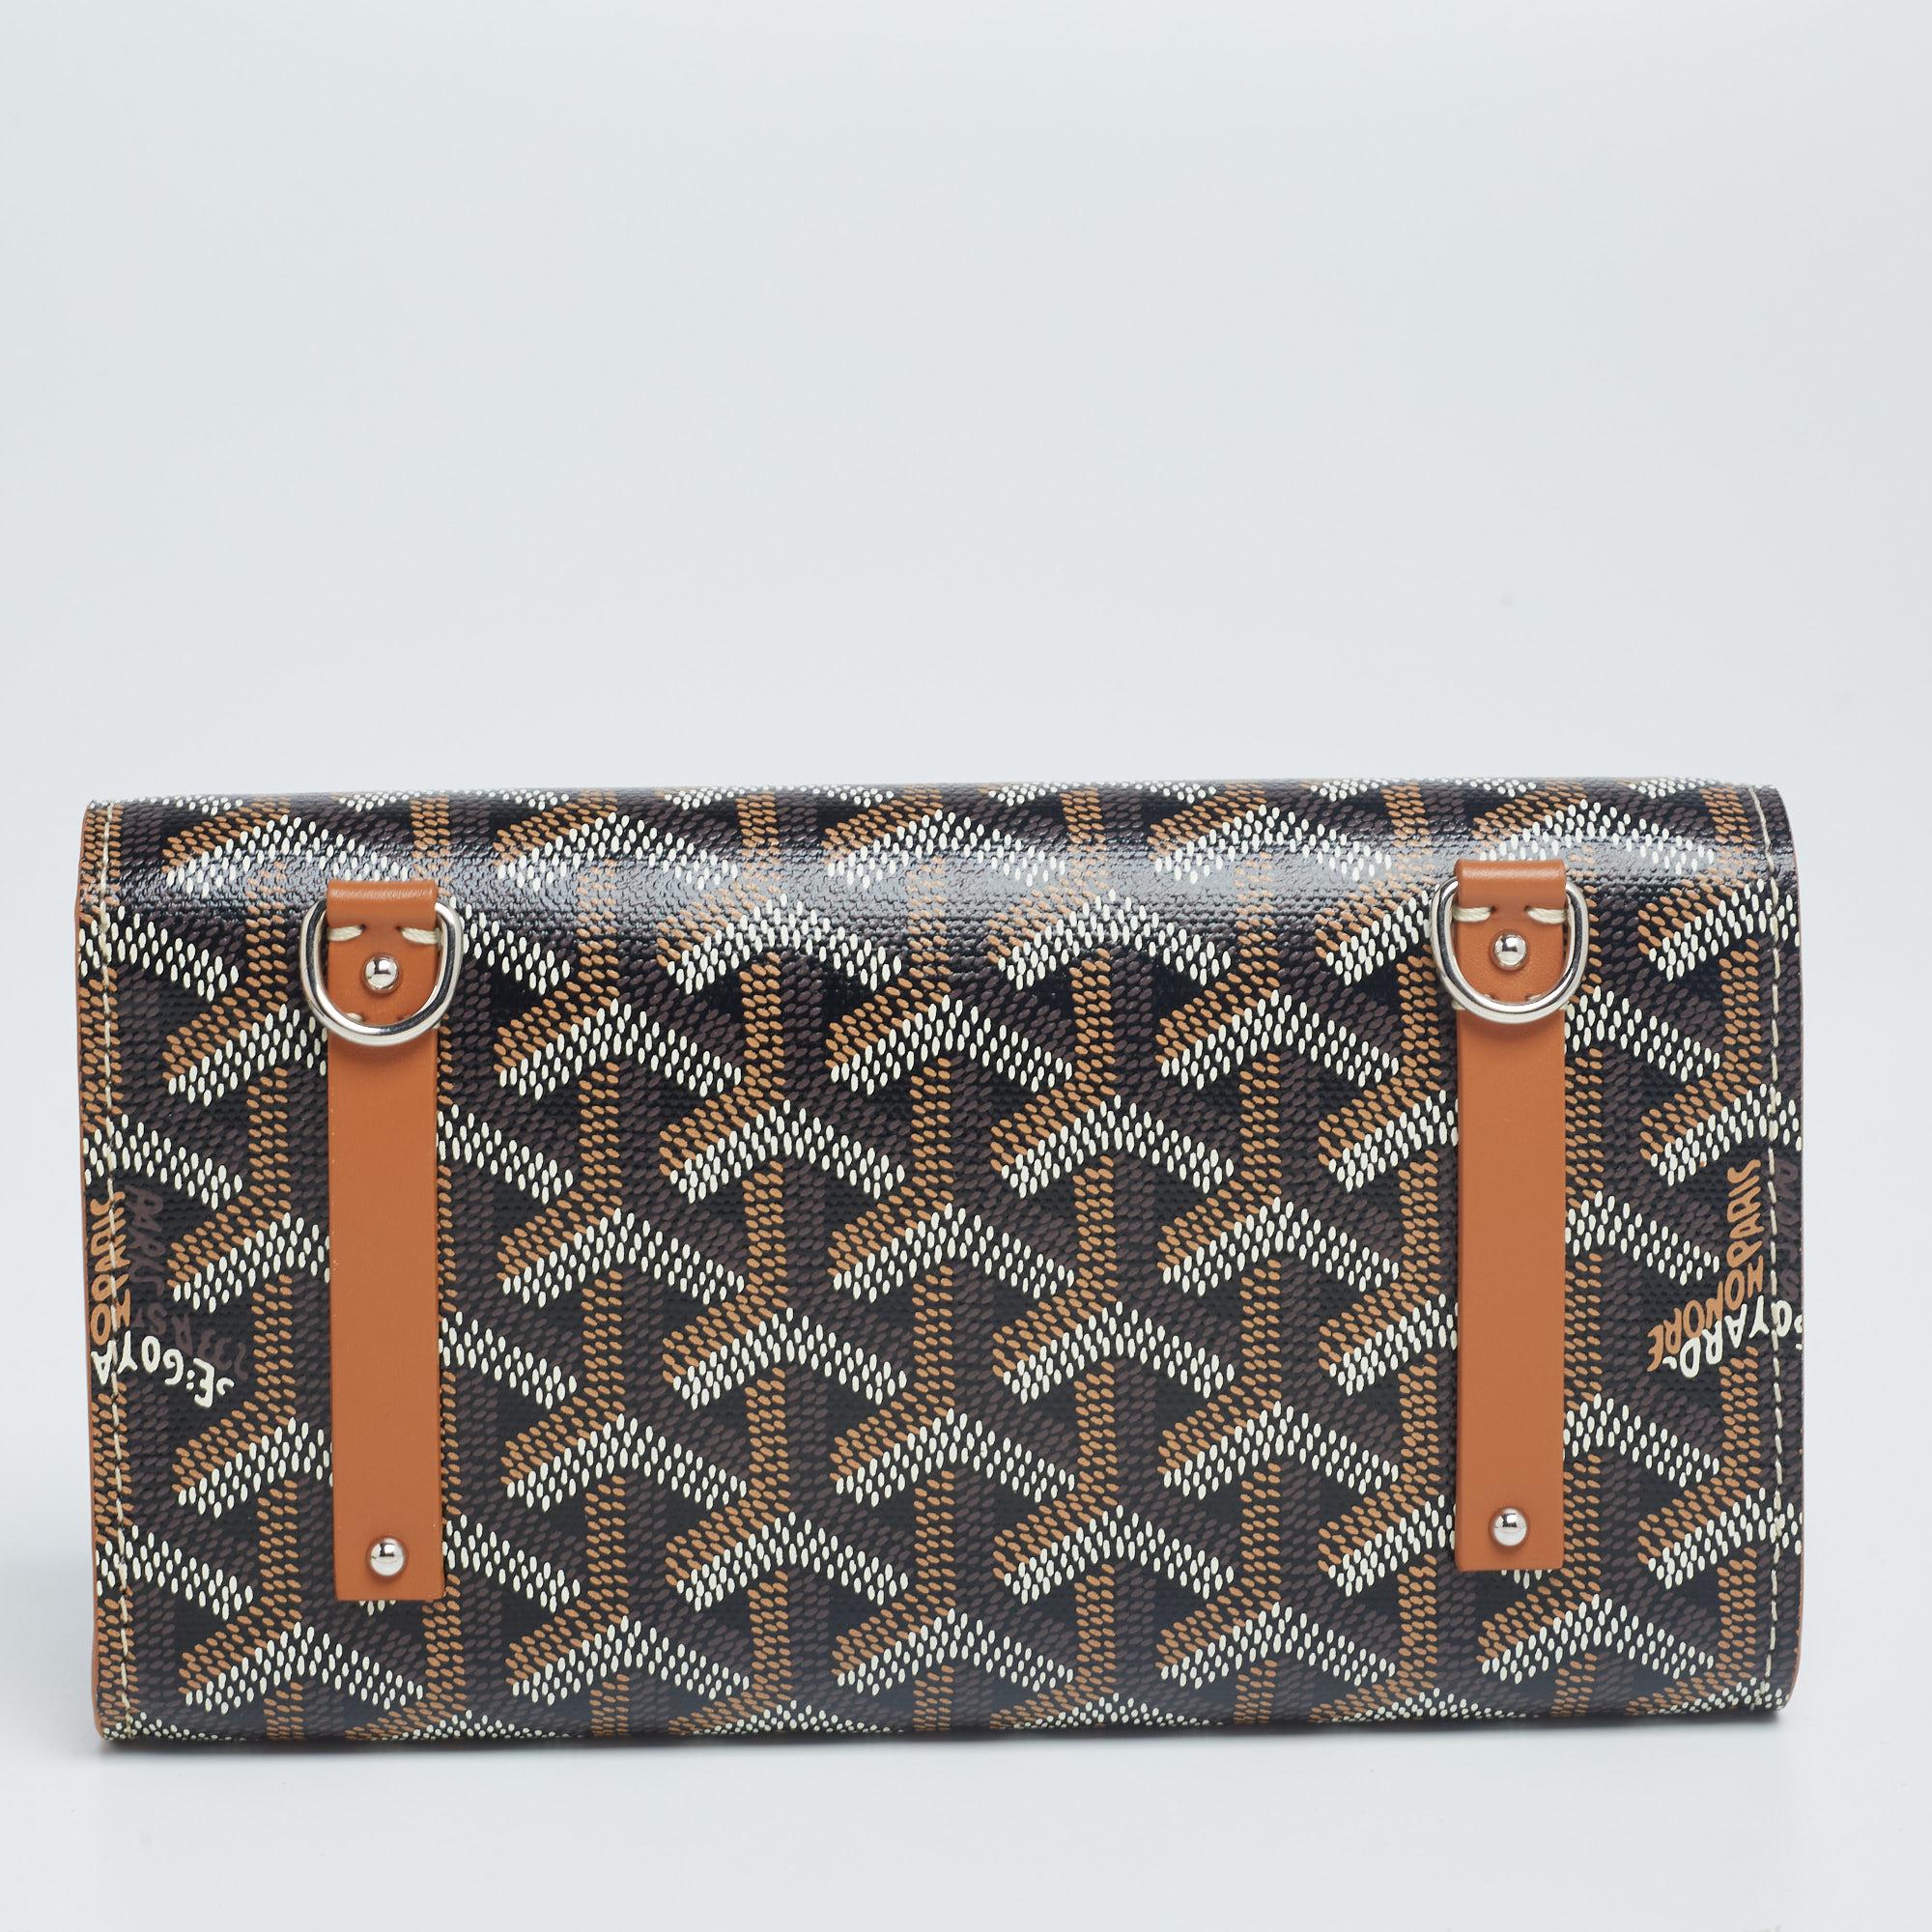 How stunning is this Monte Carlo clutch from Goyard! Crafted with minute precision, this clutch is made from the signature tan Goyardine coated canvas and leather and adorned with silver-tone hardware. The flap unveils an organized canvas-lined